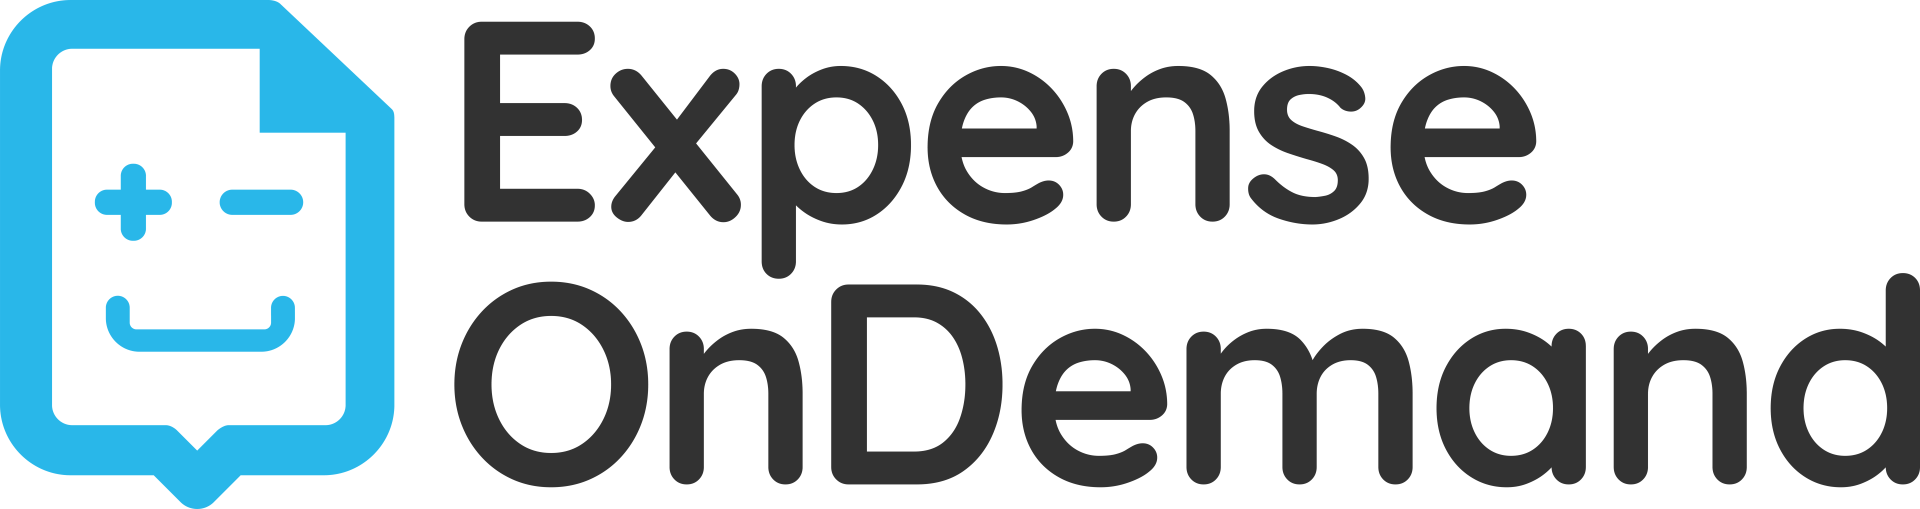 T&E expenses from ExpenseOnDemand image